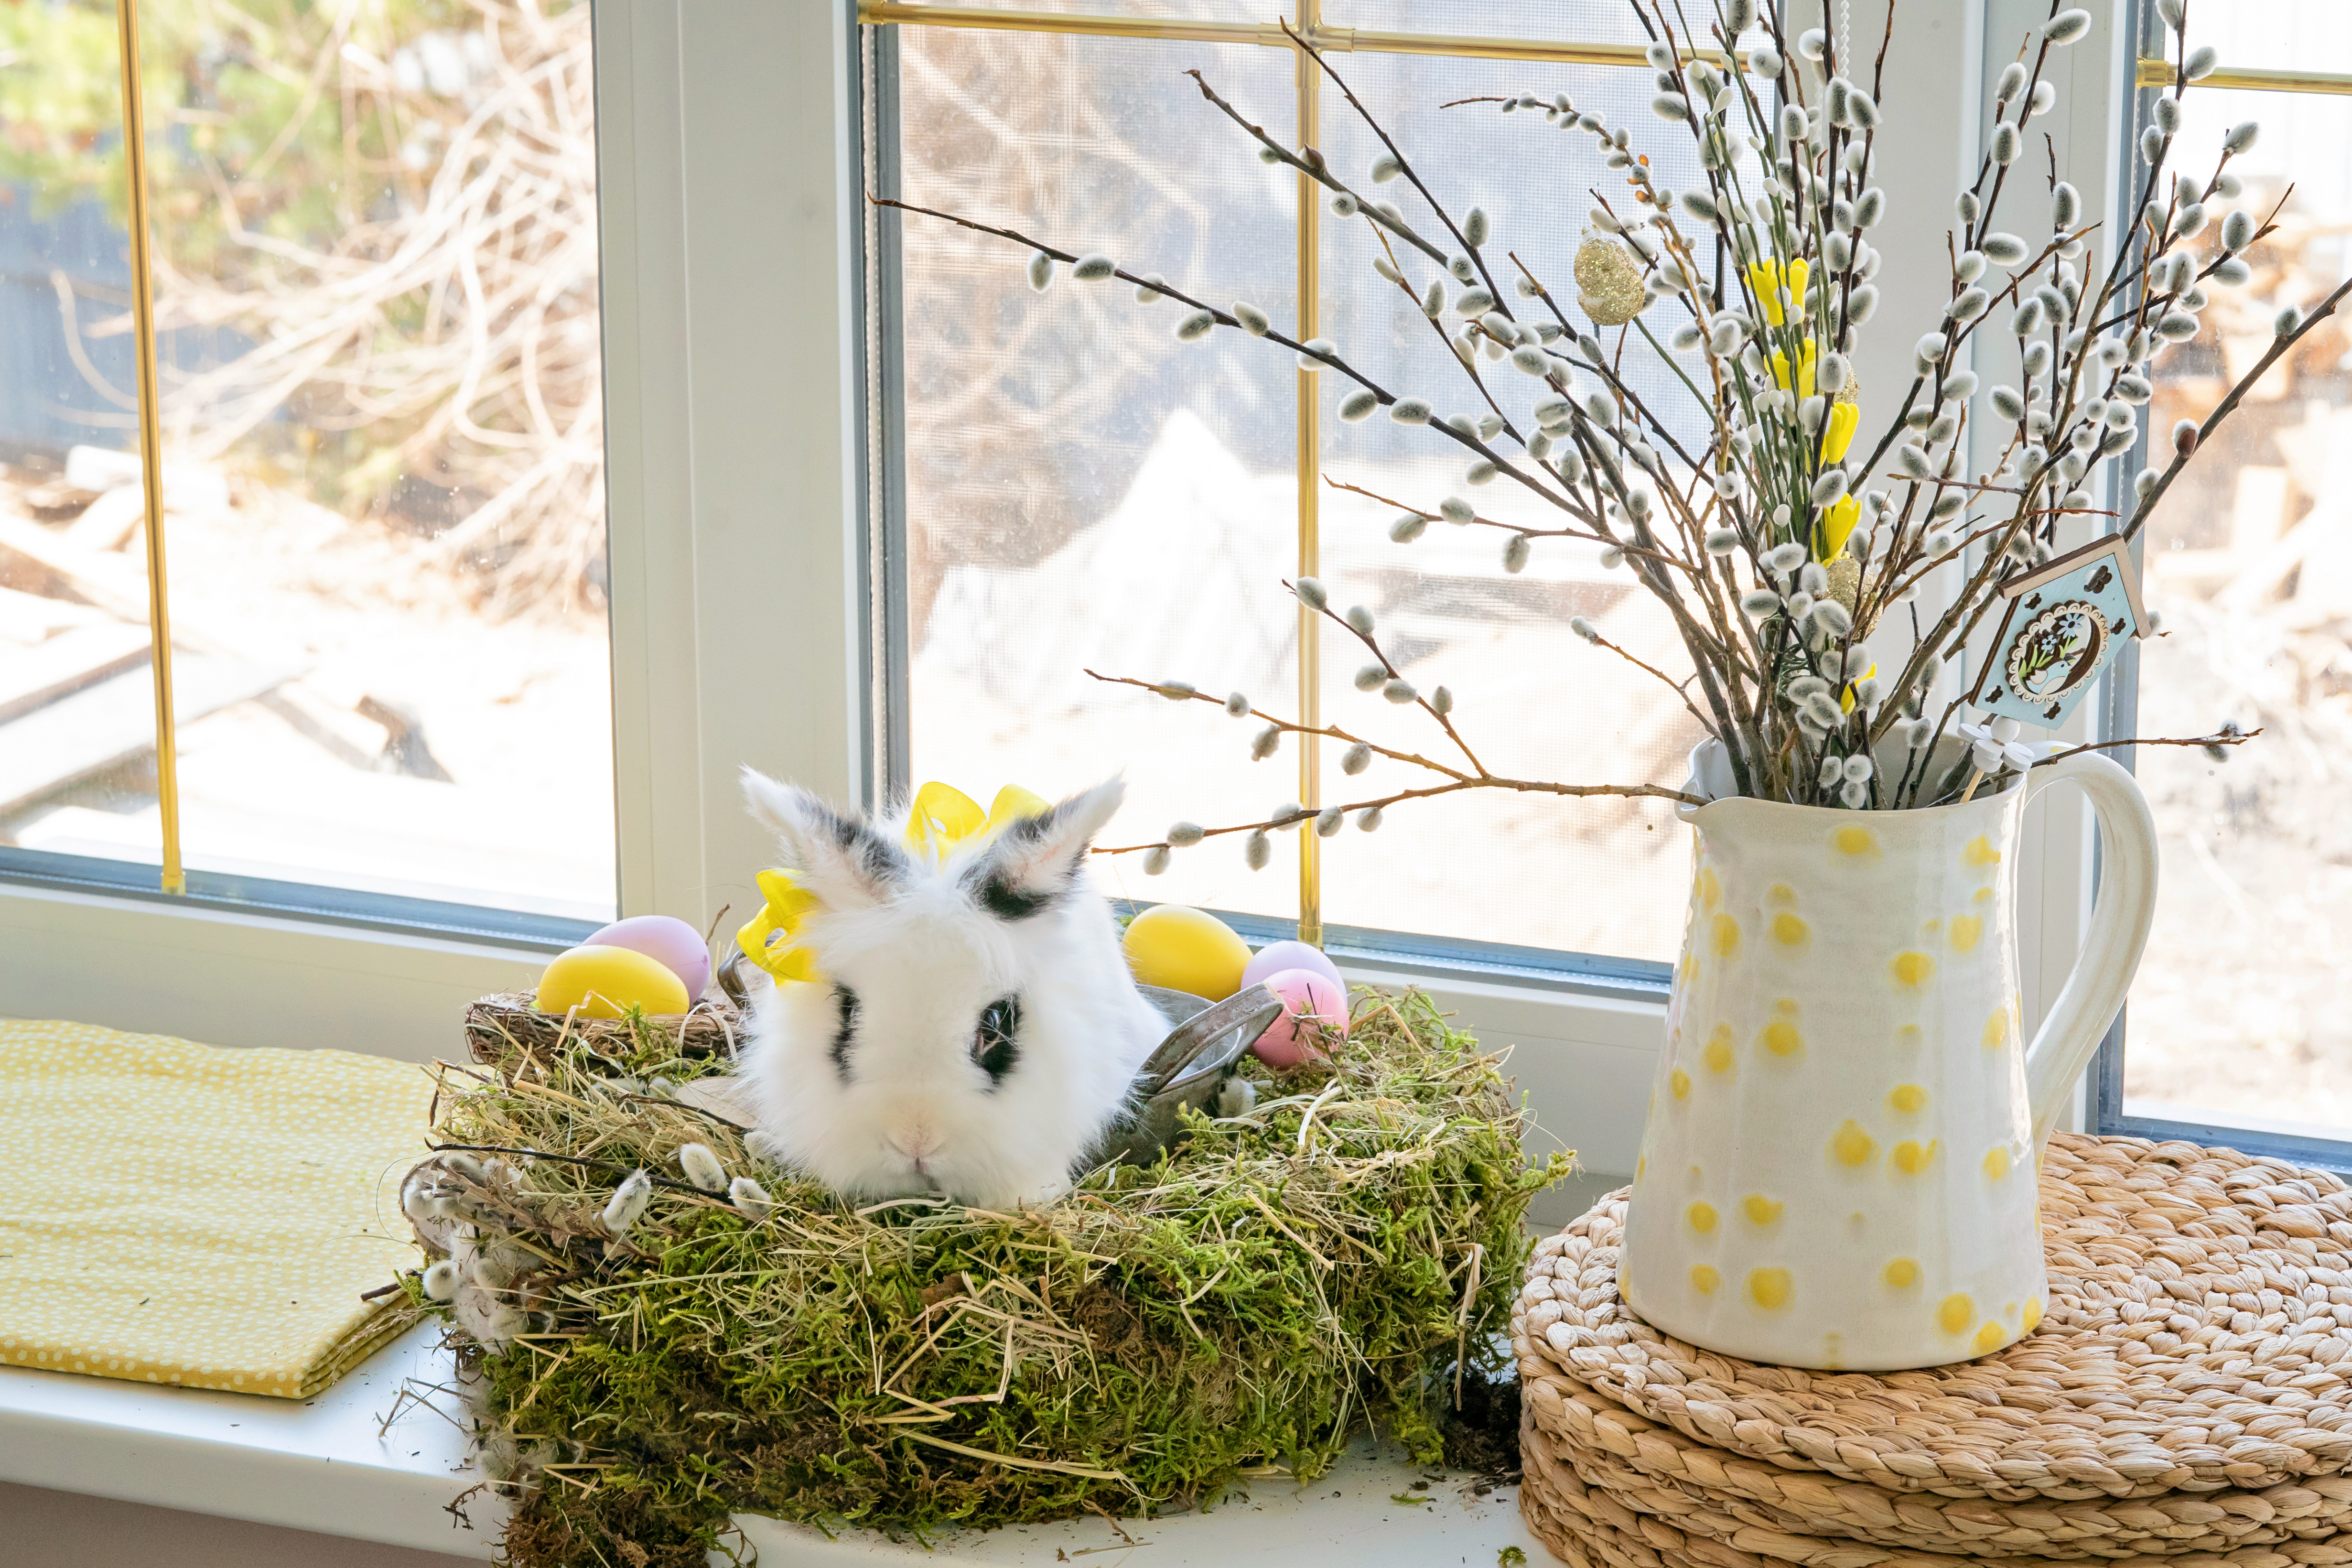 White rabbit sitting on green nest with eggs in it and a vase of flowers nearby